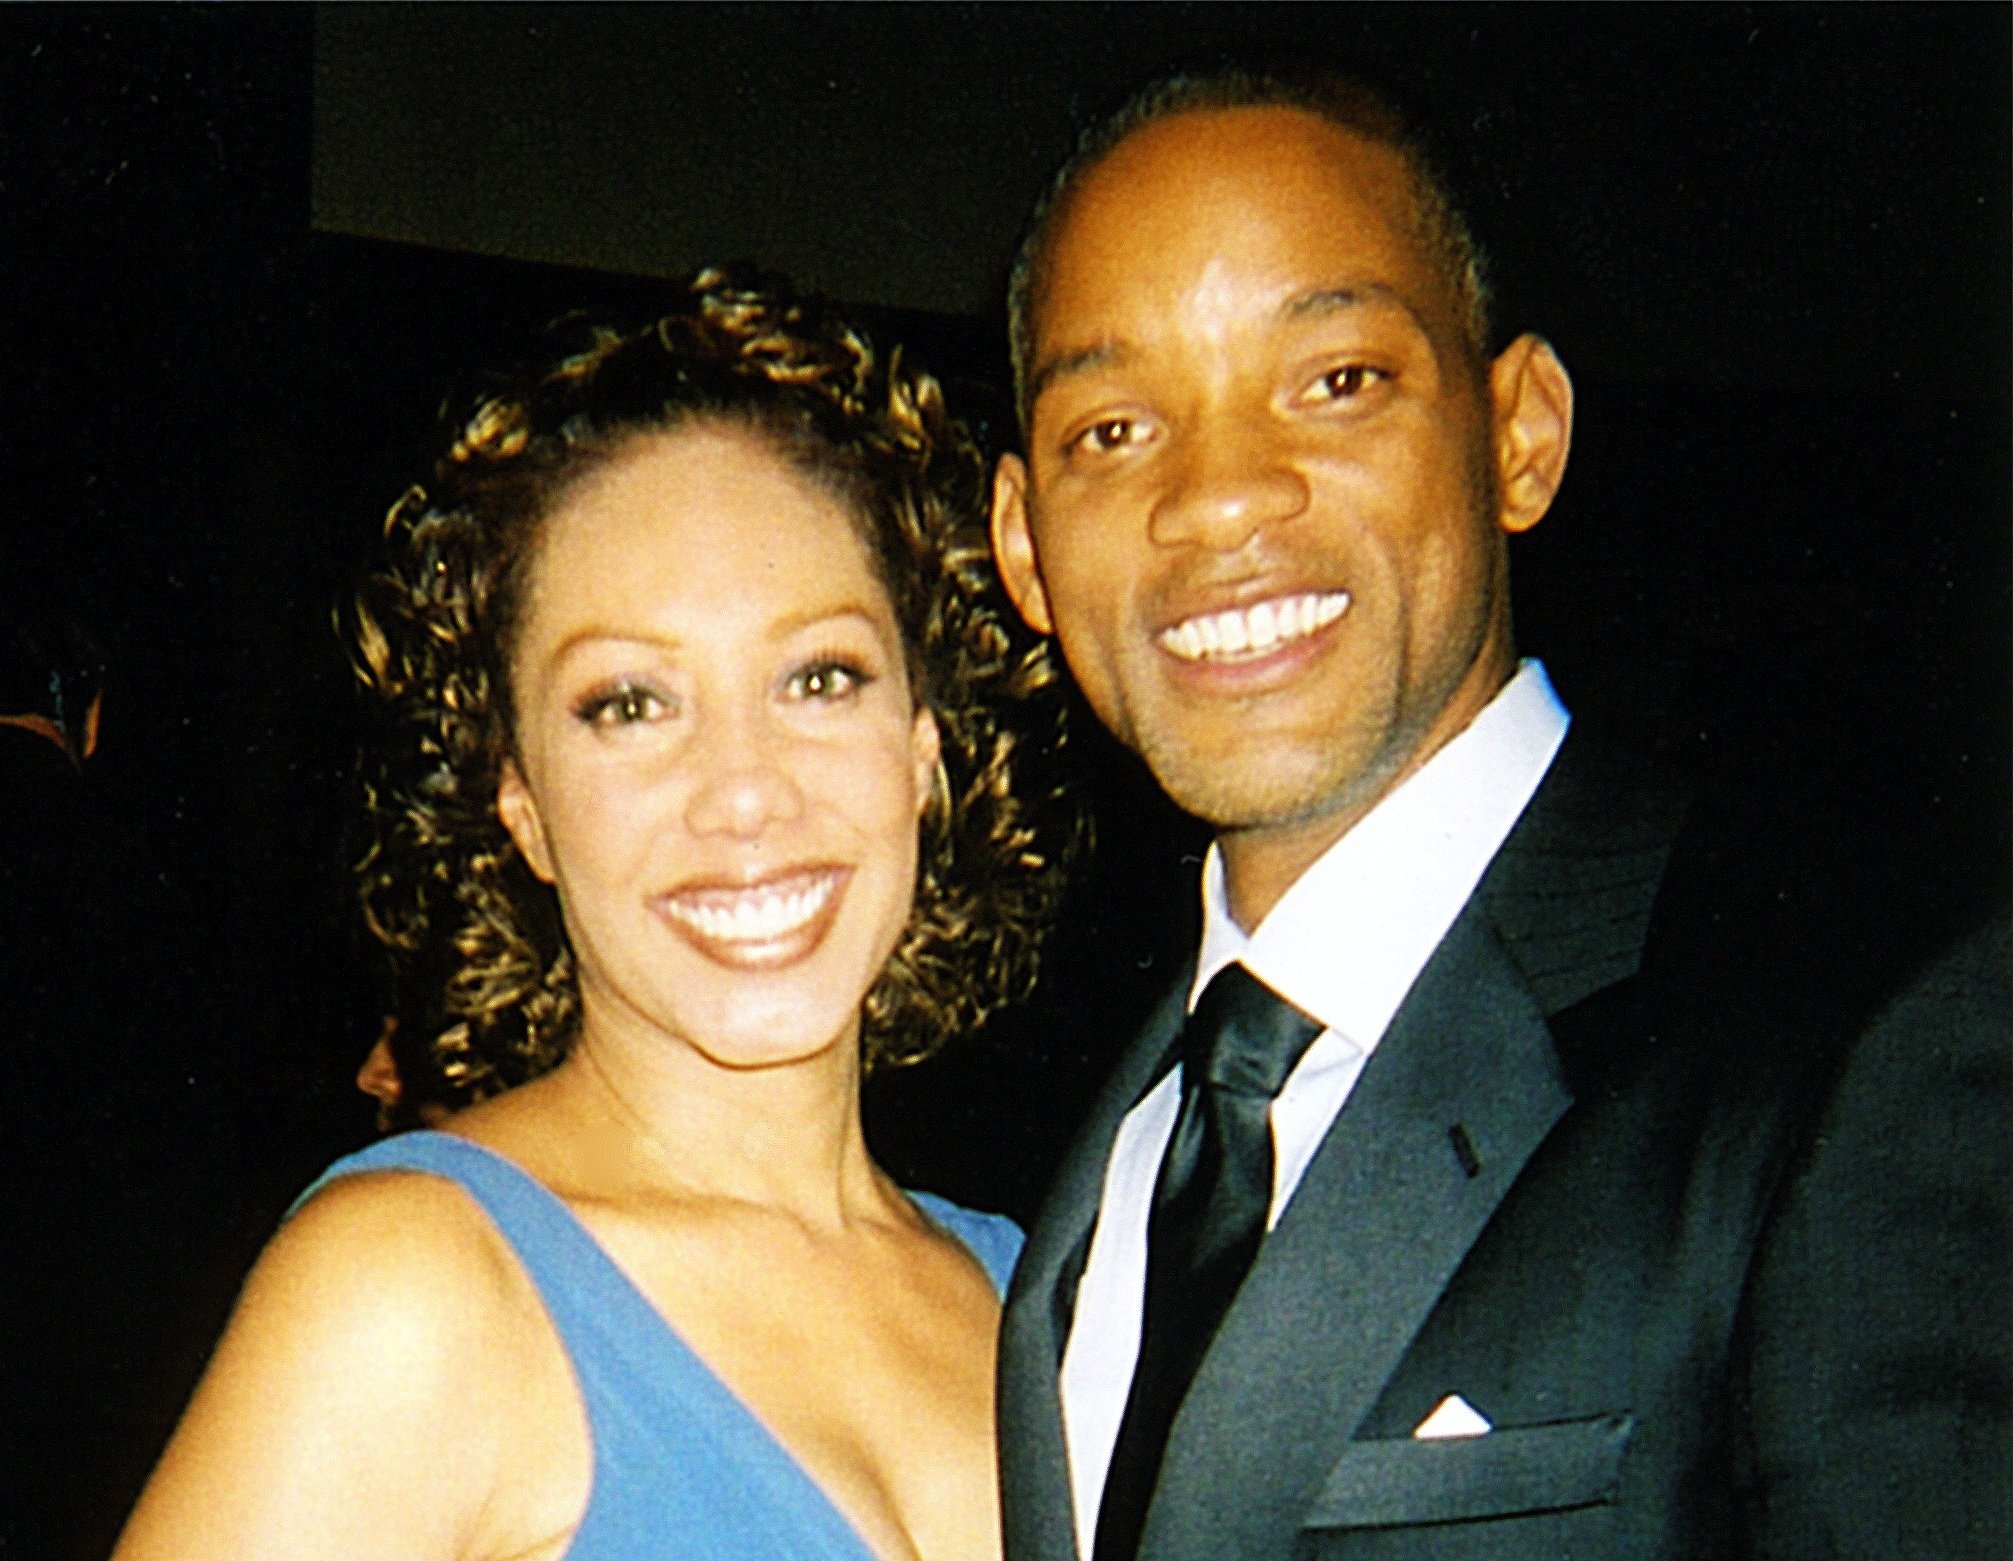 Joan Baker with the One & Only, Will Smith. Joan was the Show Announcer for The Museum of The Moving Image salute to Will Smith 2006. Airing on Bravo TV, January 12 2007